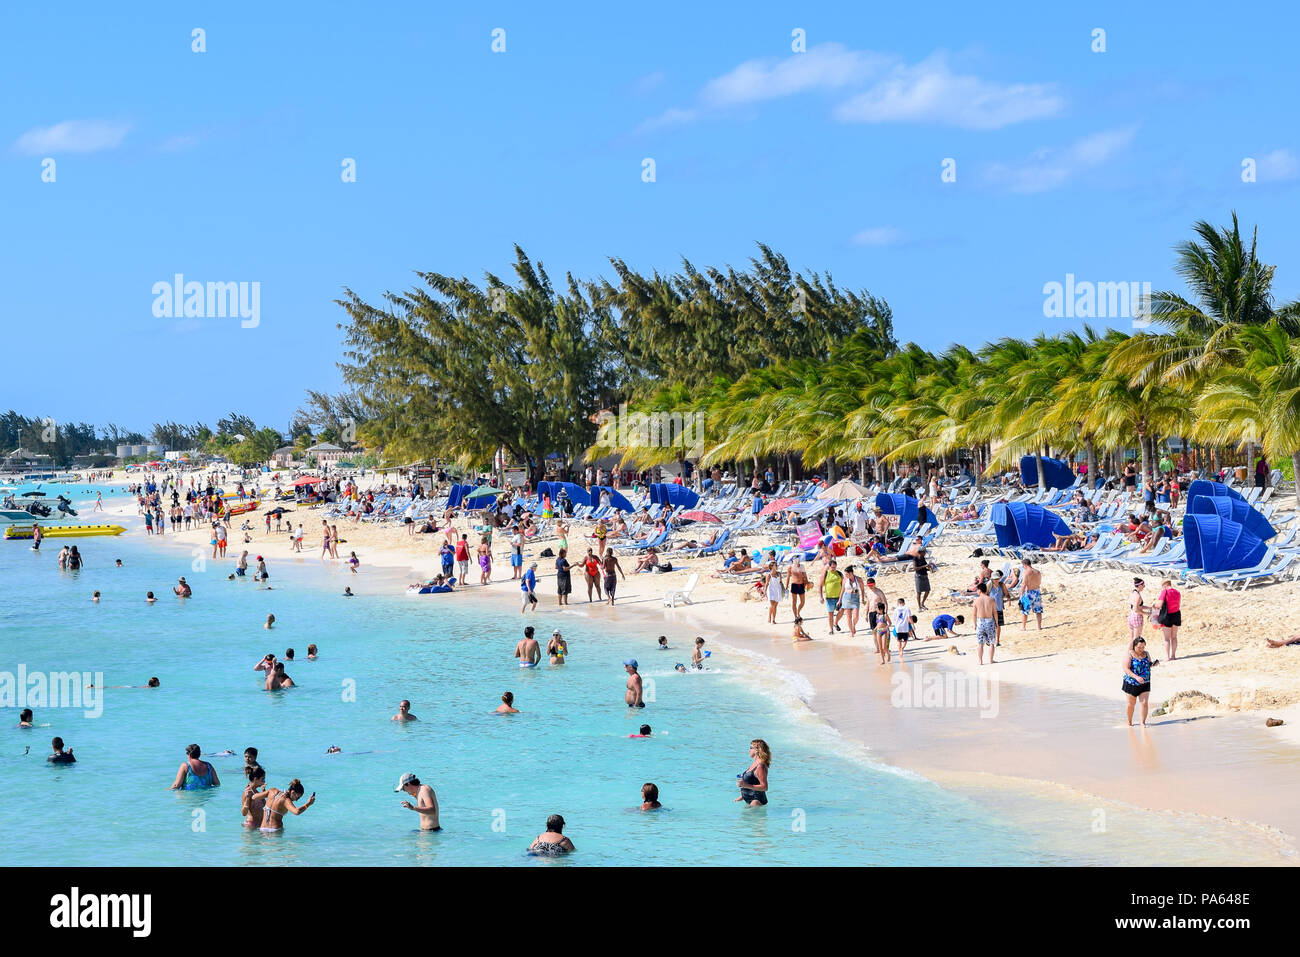 Grand Turk, Turks and Caicos Islands - April 03 2014: Crowded day at Cruise Center Beach (SunRay Beach) in Grand Turk. Stock Photo